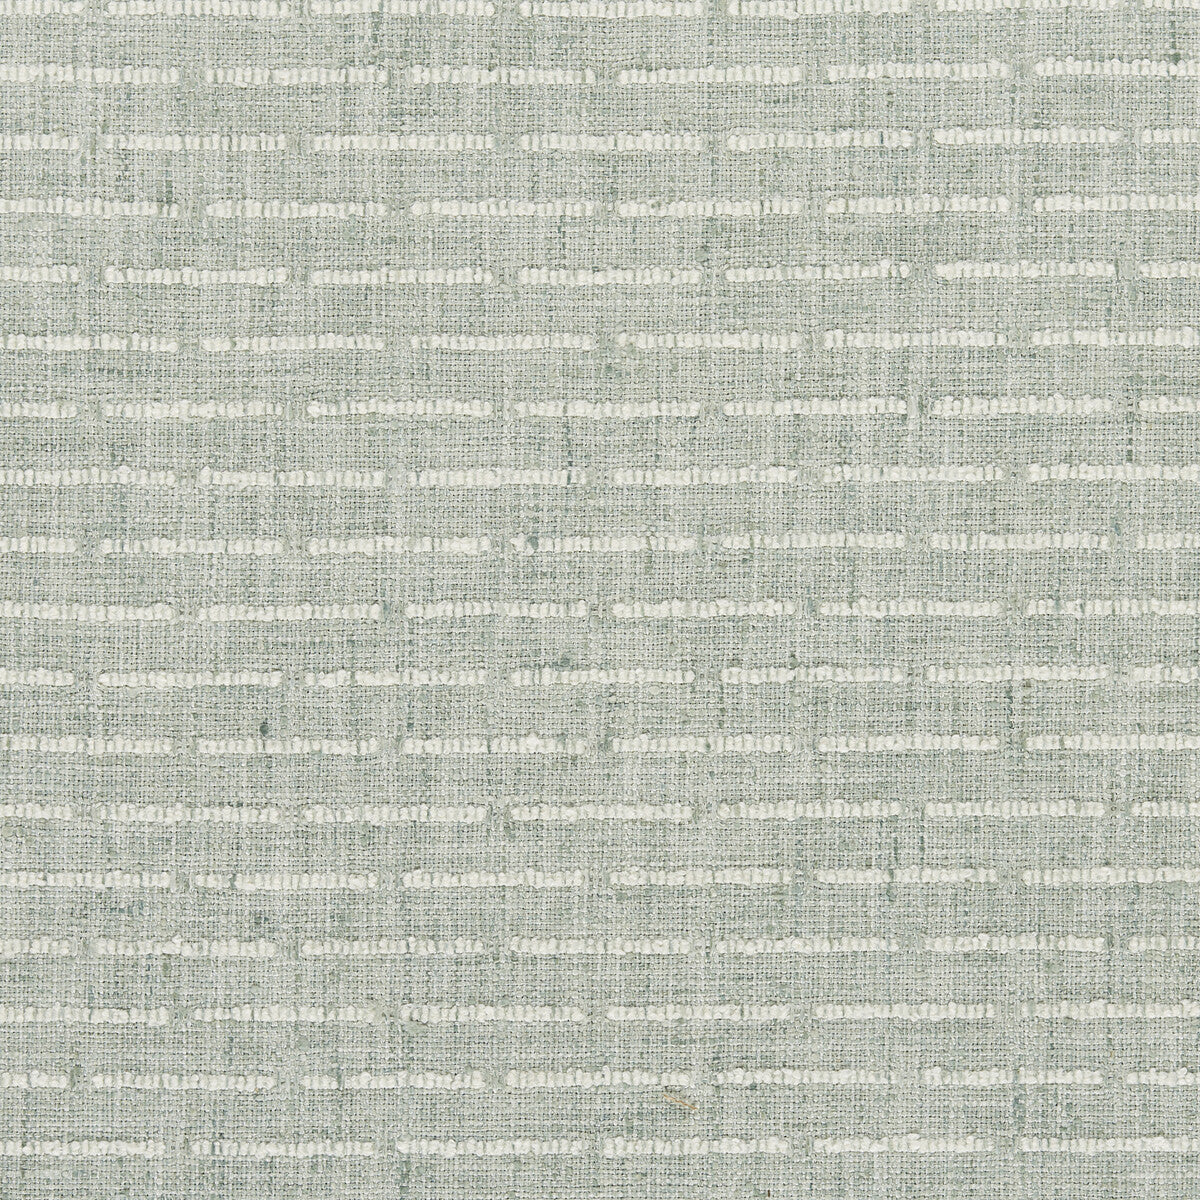 Kravet Basics fabric in 36528-135 color - pattern 36528.135.0 - by Kravet Basics in the Bungalow Chic II collection